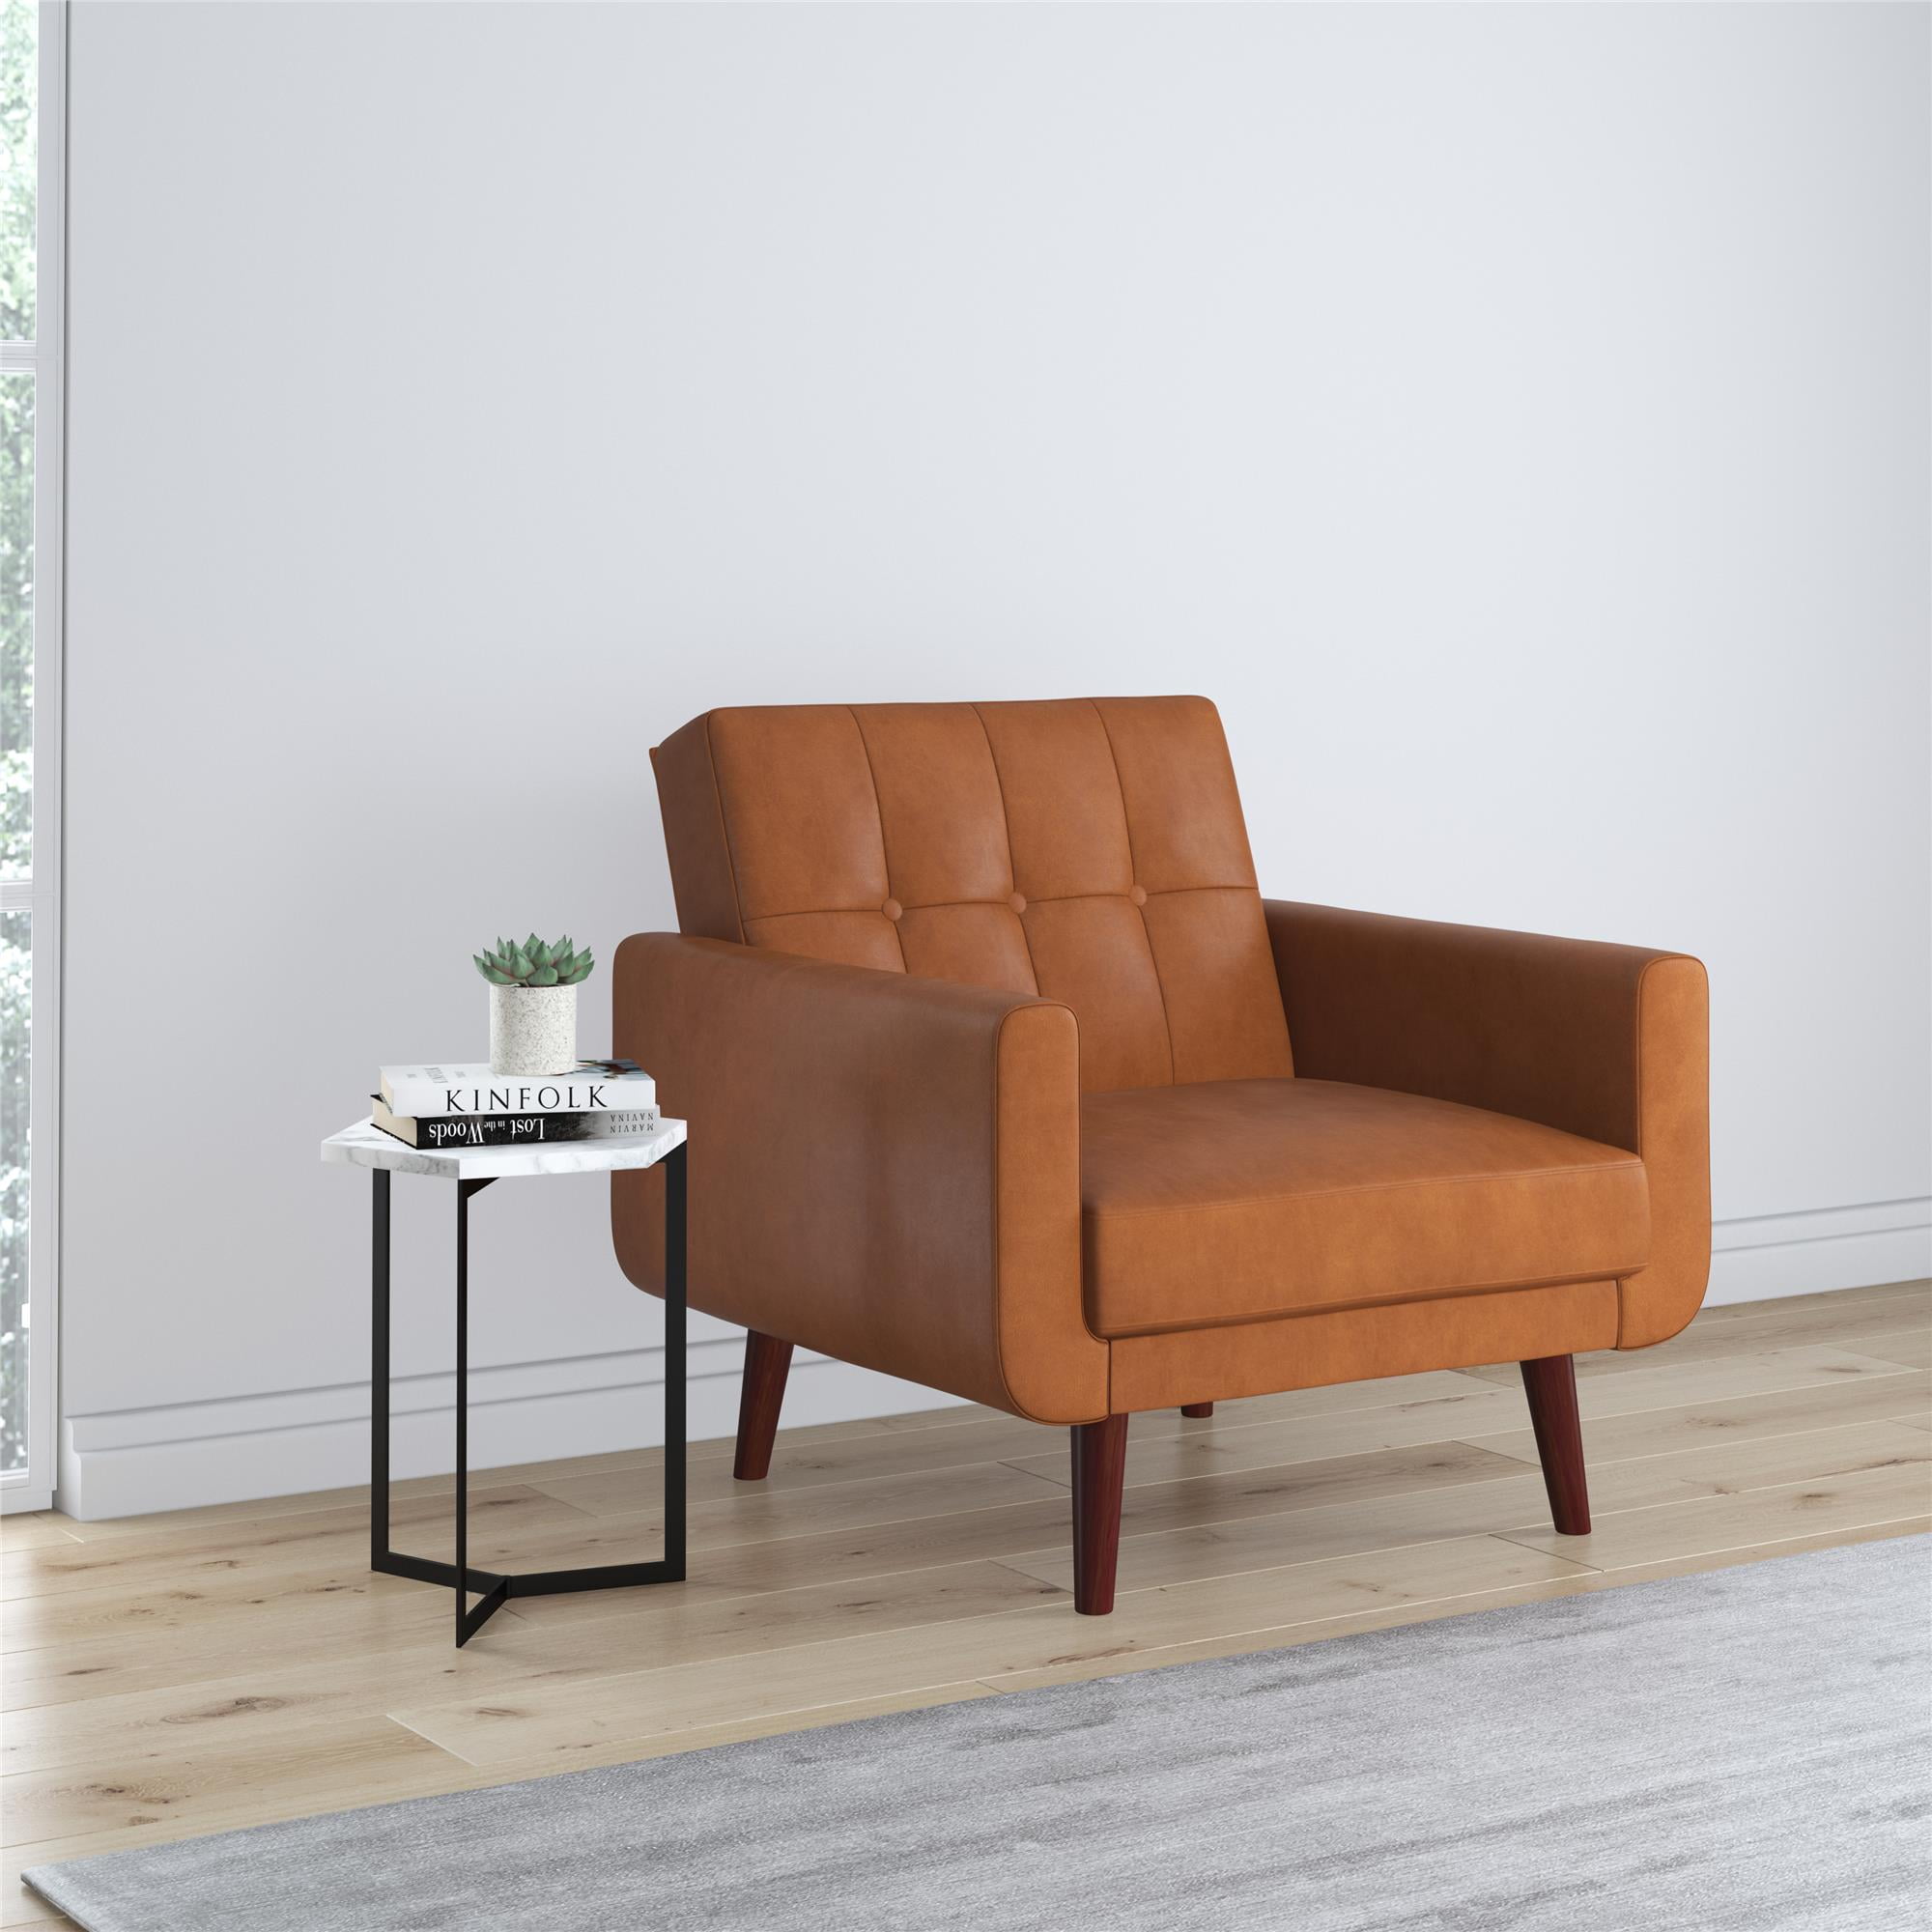 Better Homes & Gardens Nola Modern Chair with Arms, Camel Faux Leather 